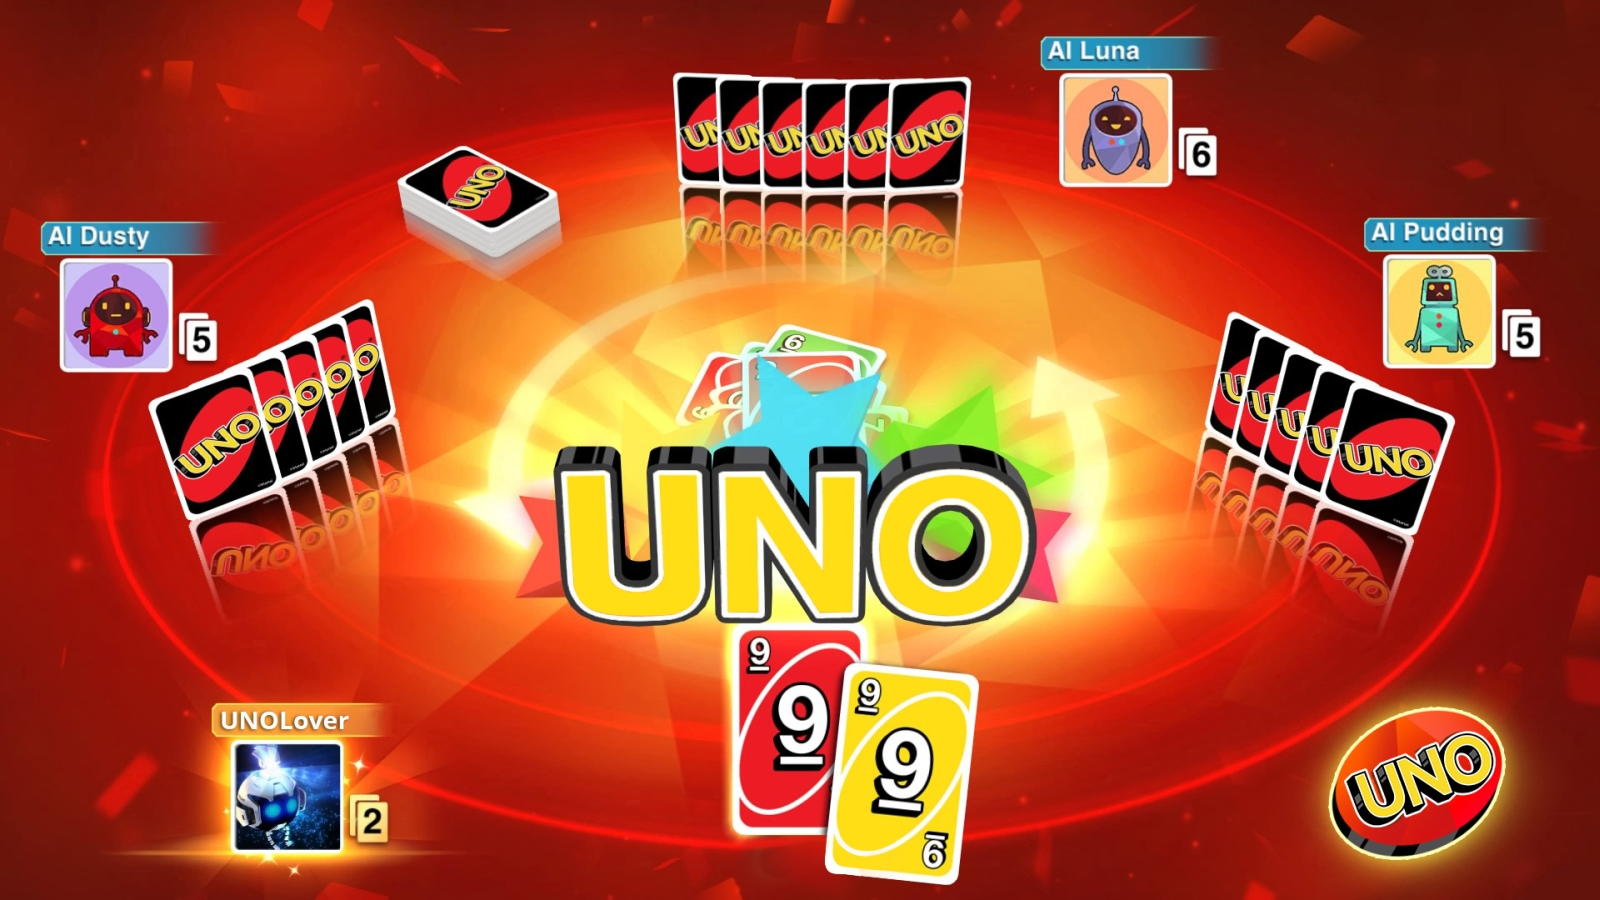 Board Games for Nintendo Switch: UNO